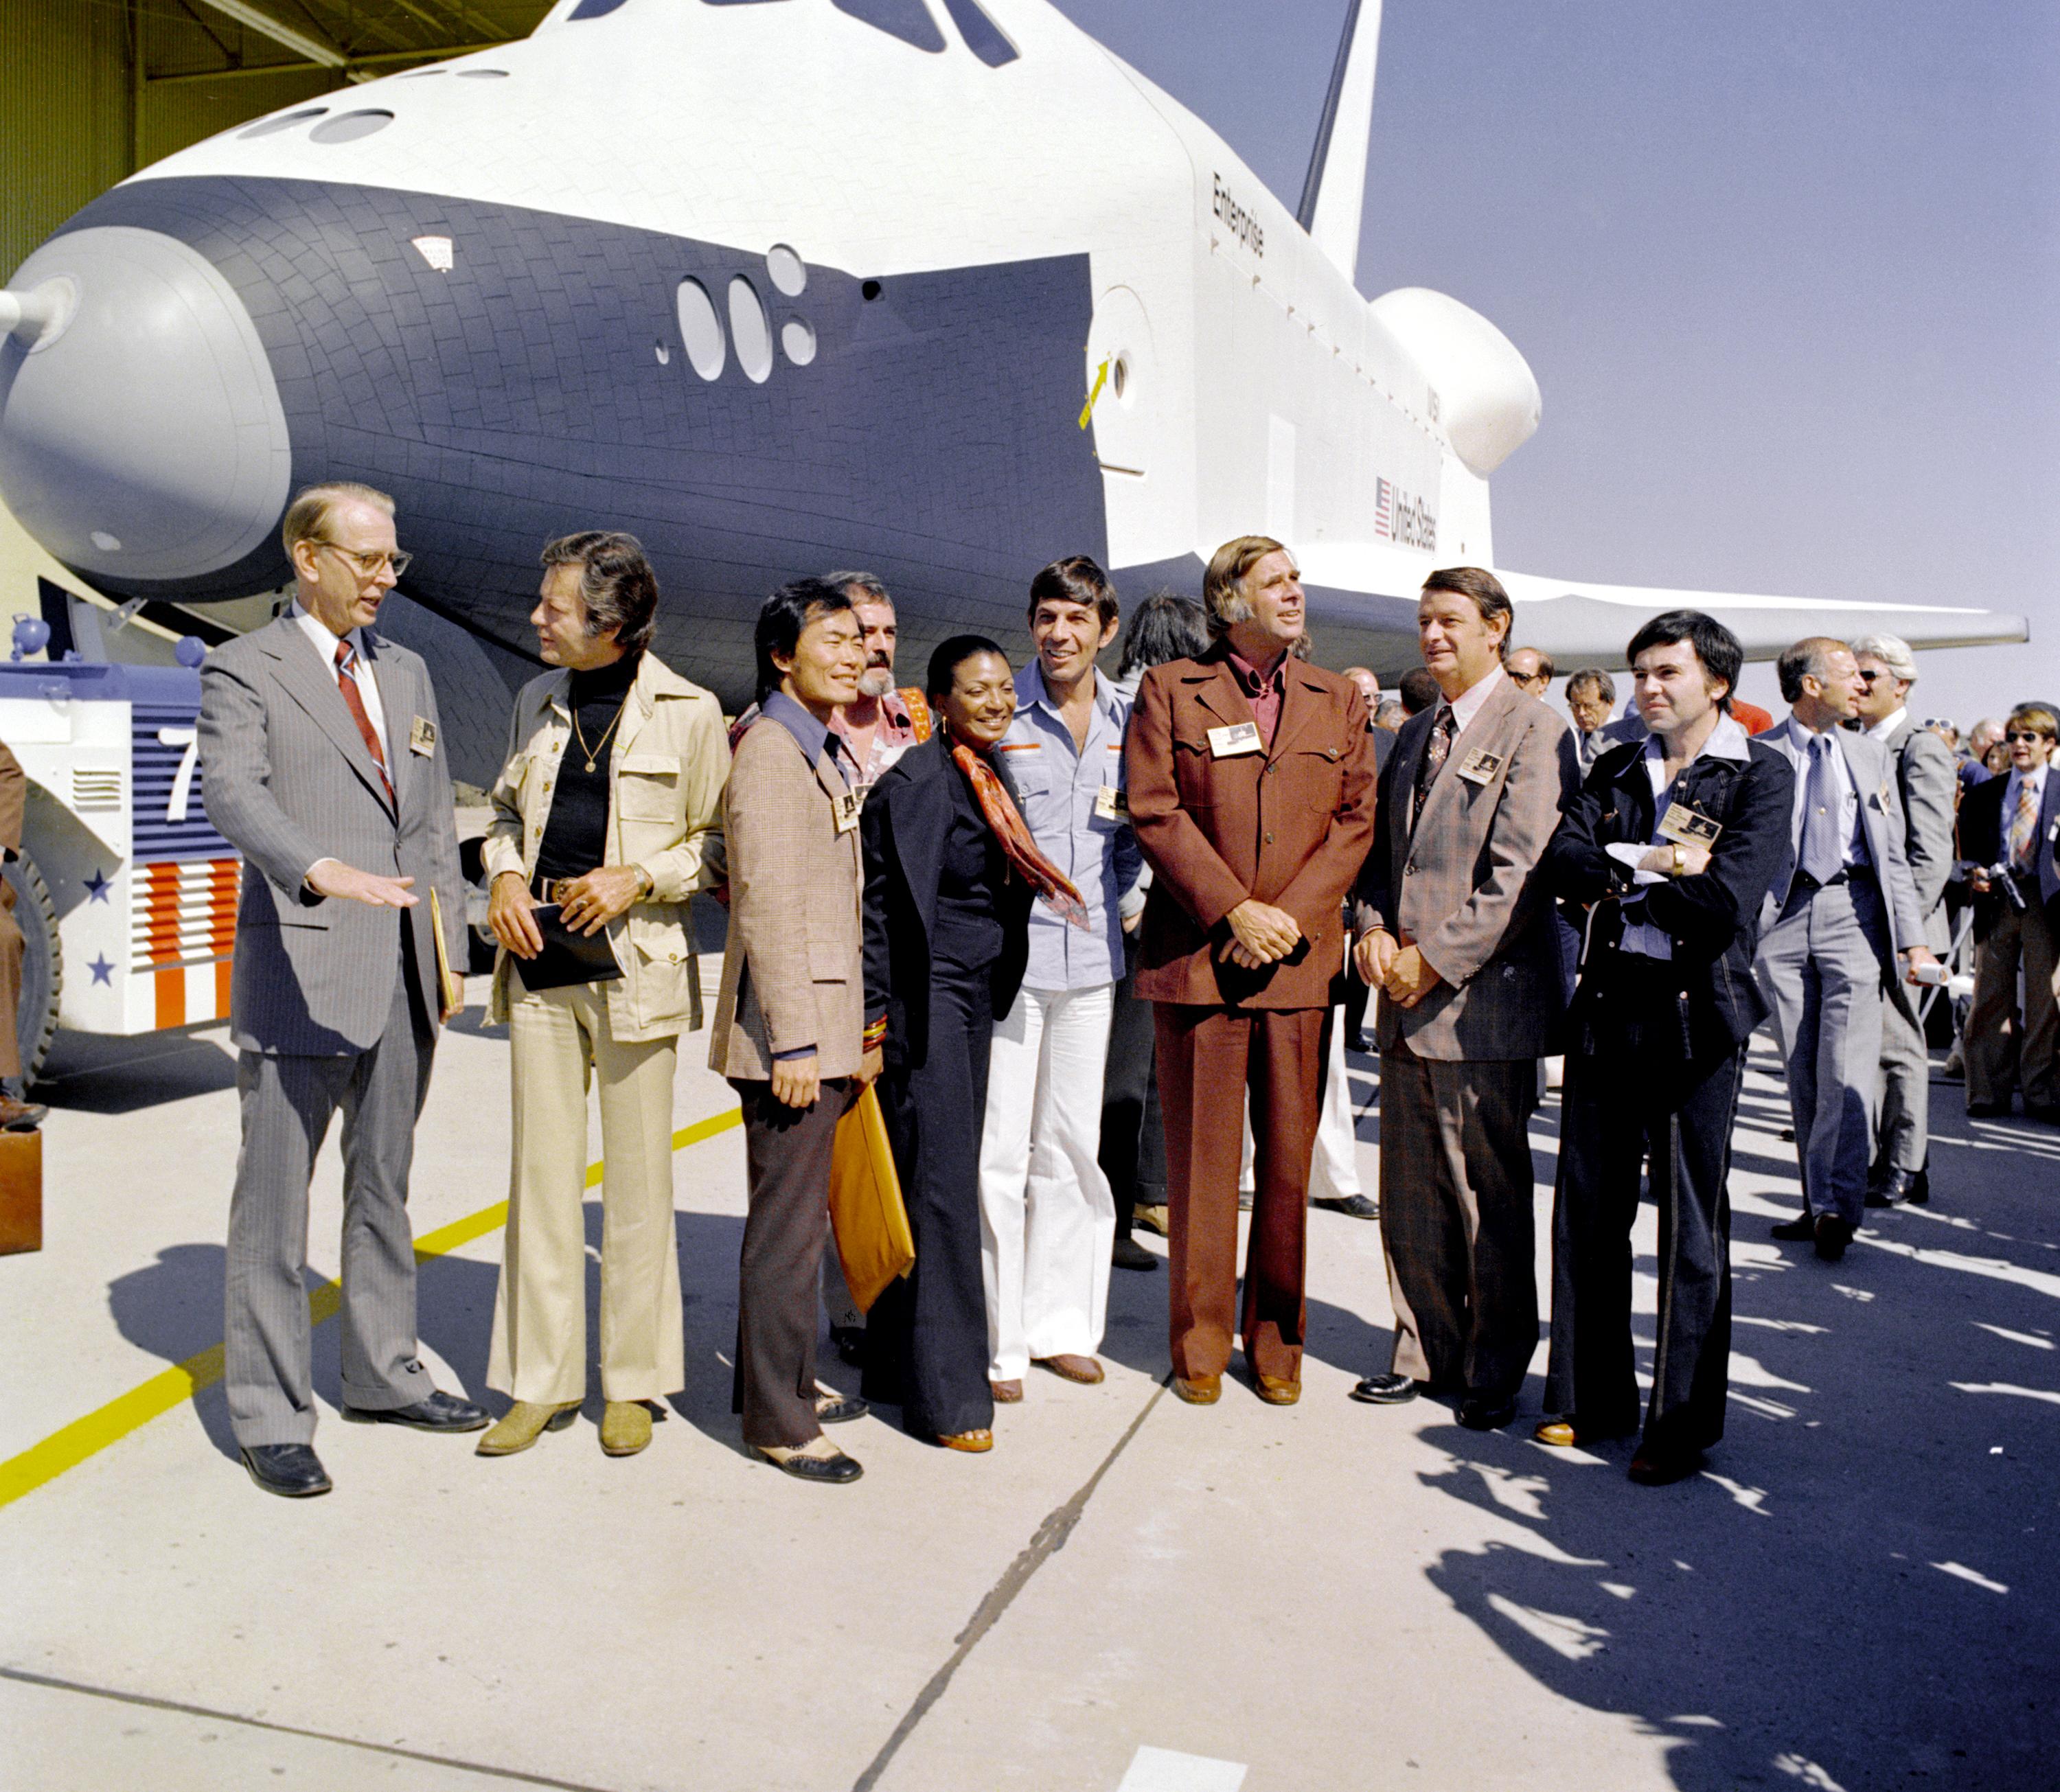 NASA Administrator James C. Fletcher, left, poses with several cast members and creator of the TV series “Star Trek” at Enterprise’s rollout